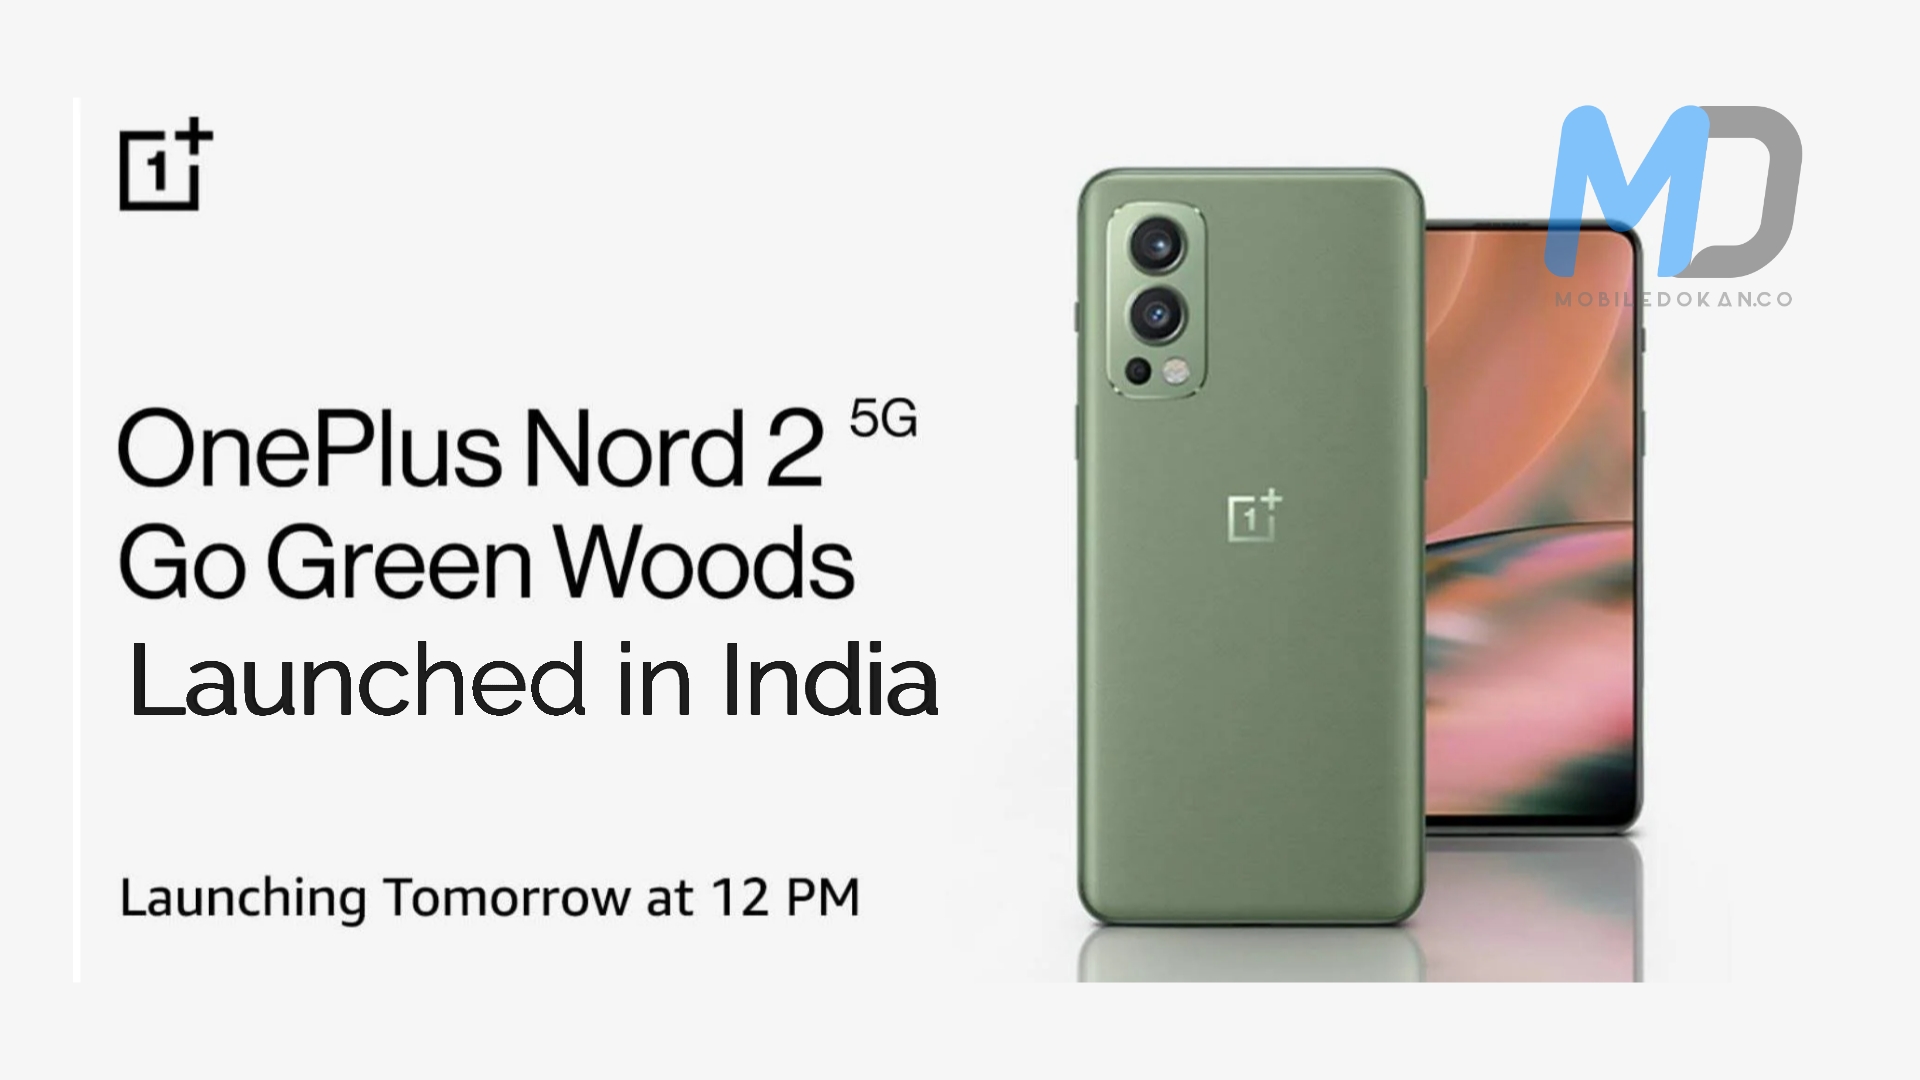 OnePlus Nord 2 comes with Go Green Woods color variant